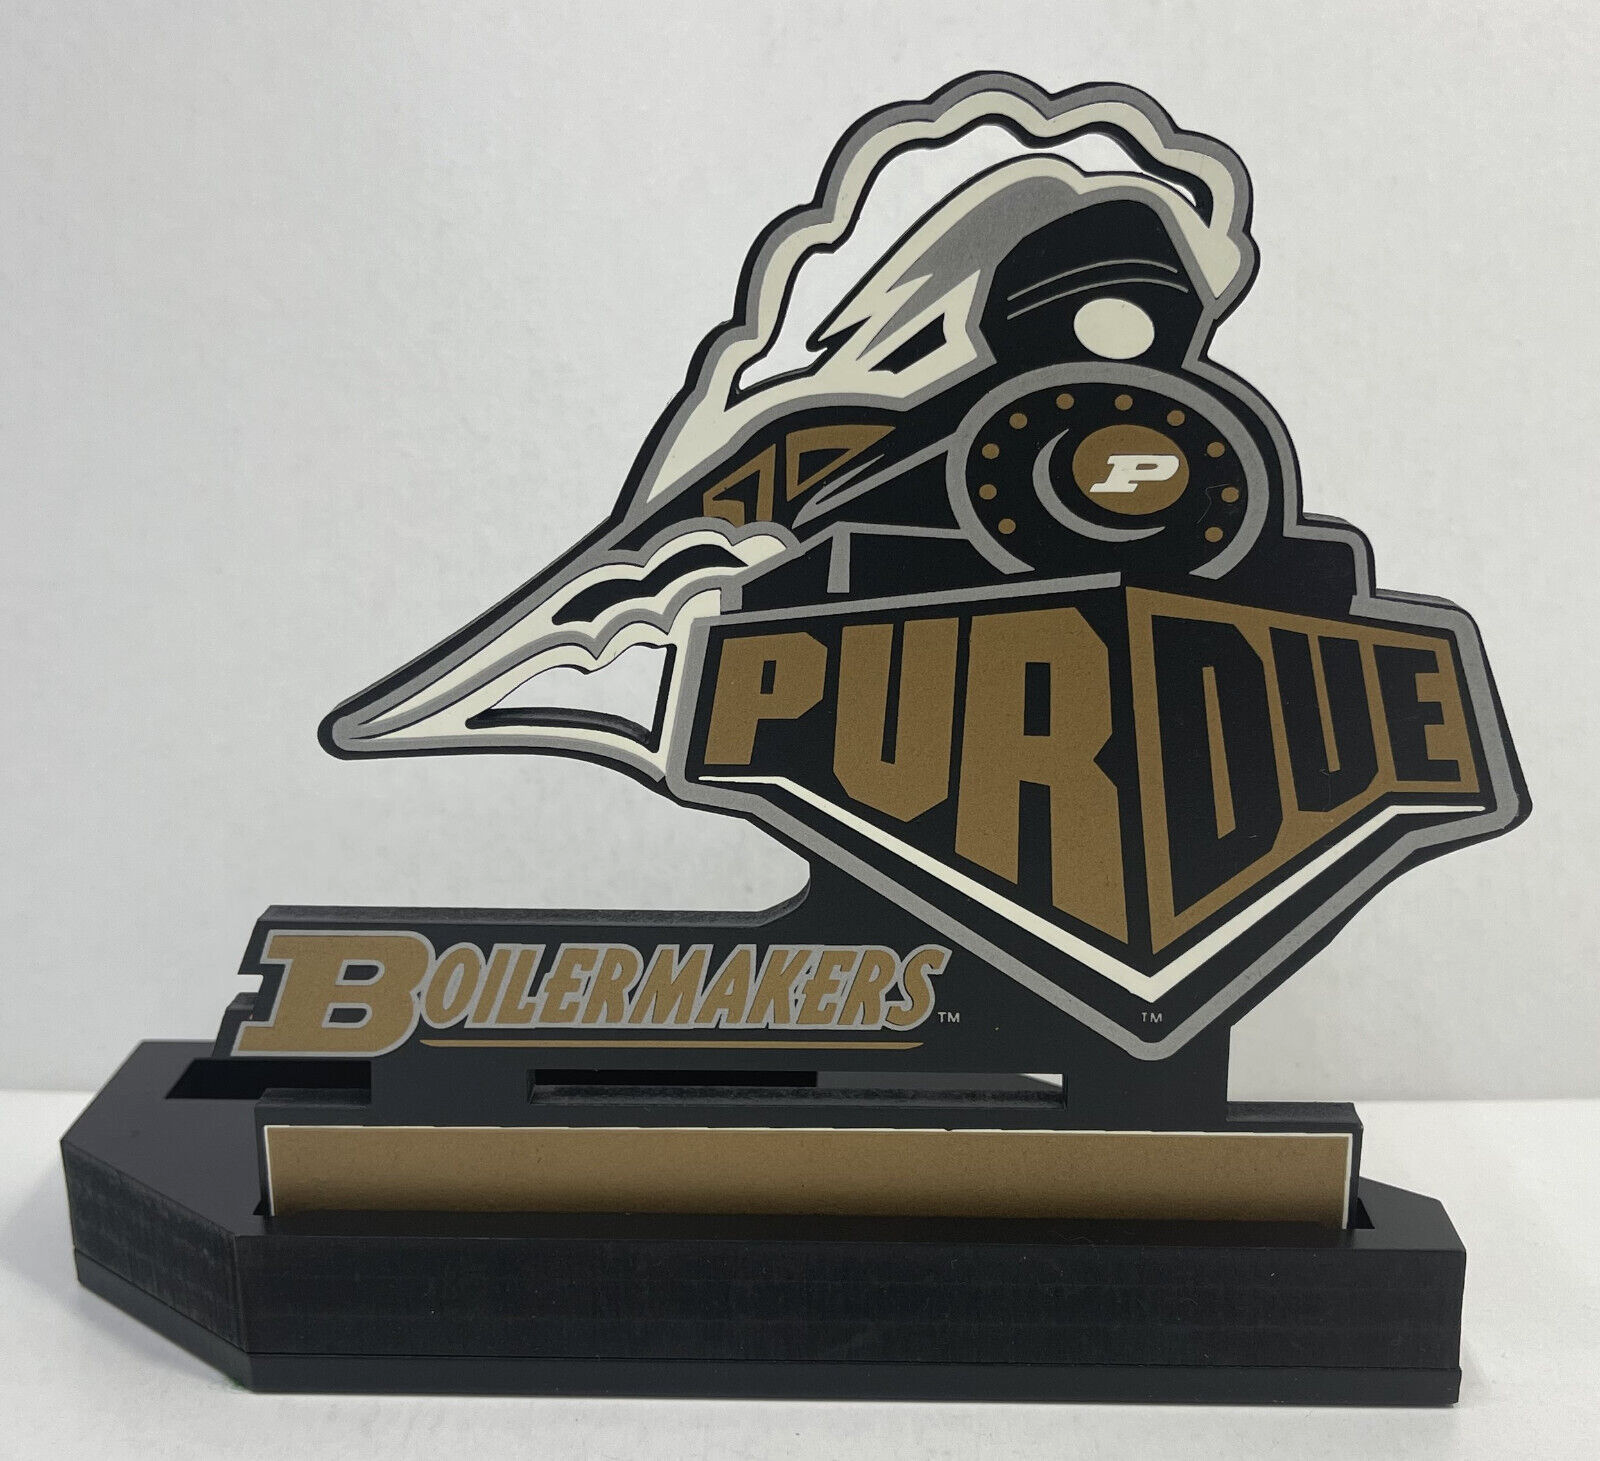 Primary image for PURDUE BOILERMAKERS LICENSED SHELIA'S NCAA FOOTBALL WOOD PLAQUE/SIGN!